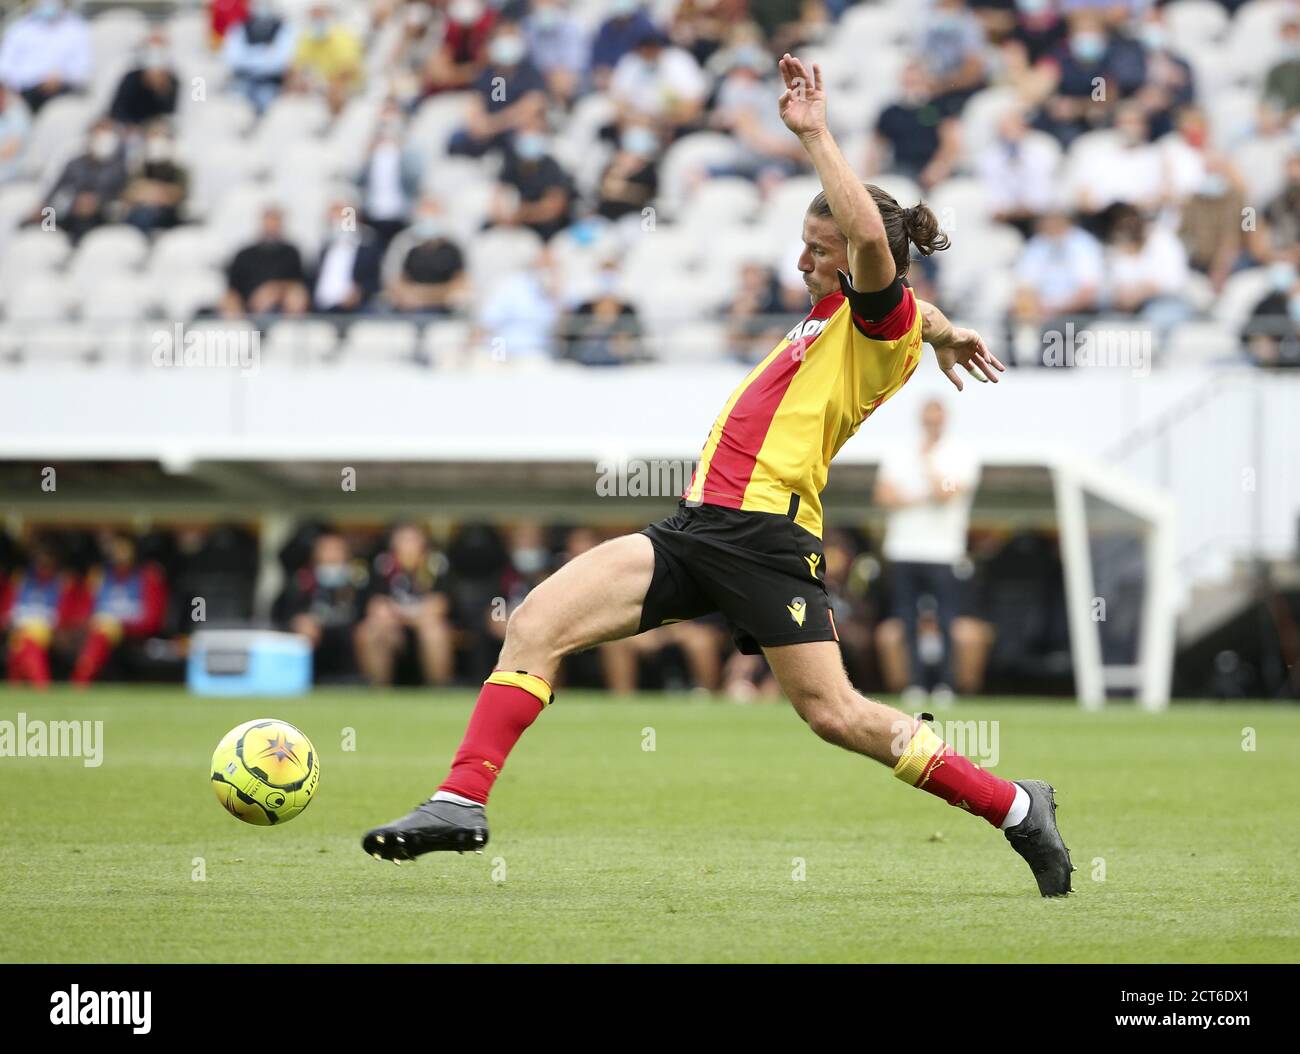 Yannick Cahuzac of Lens during the French championship Ligue 1 football match between RC Lens and Girondins de Bordeaux on September 19, 2020 at Stade Stock Photo